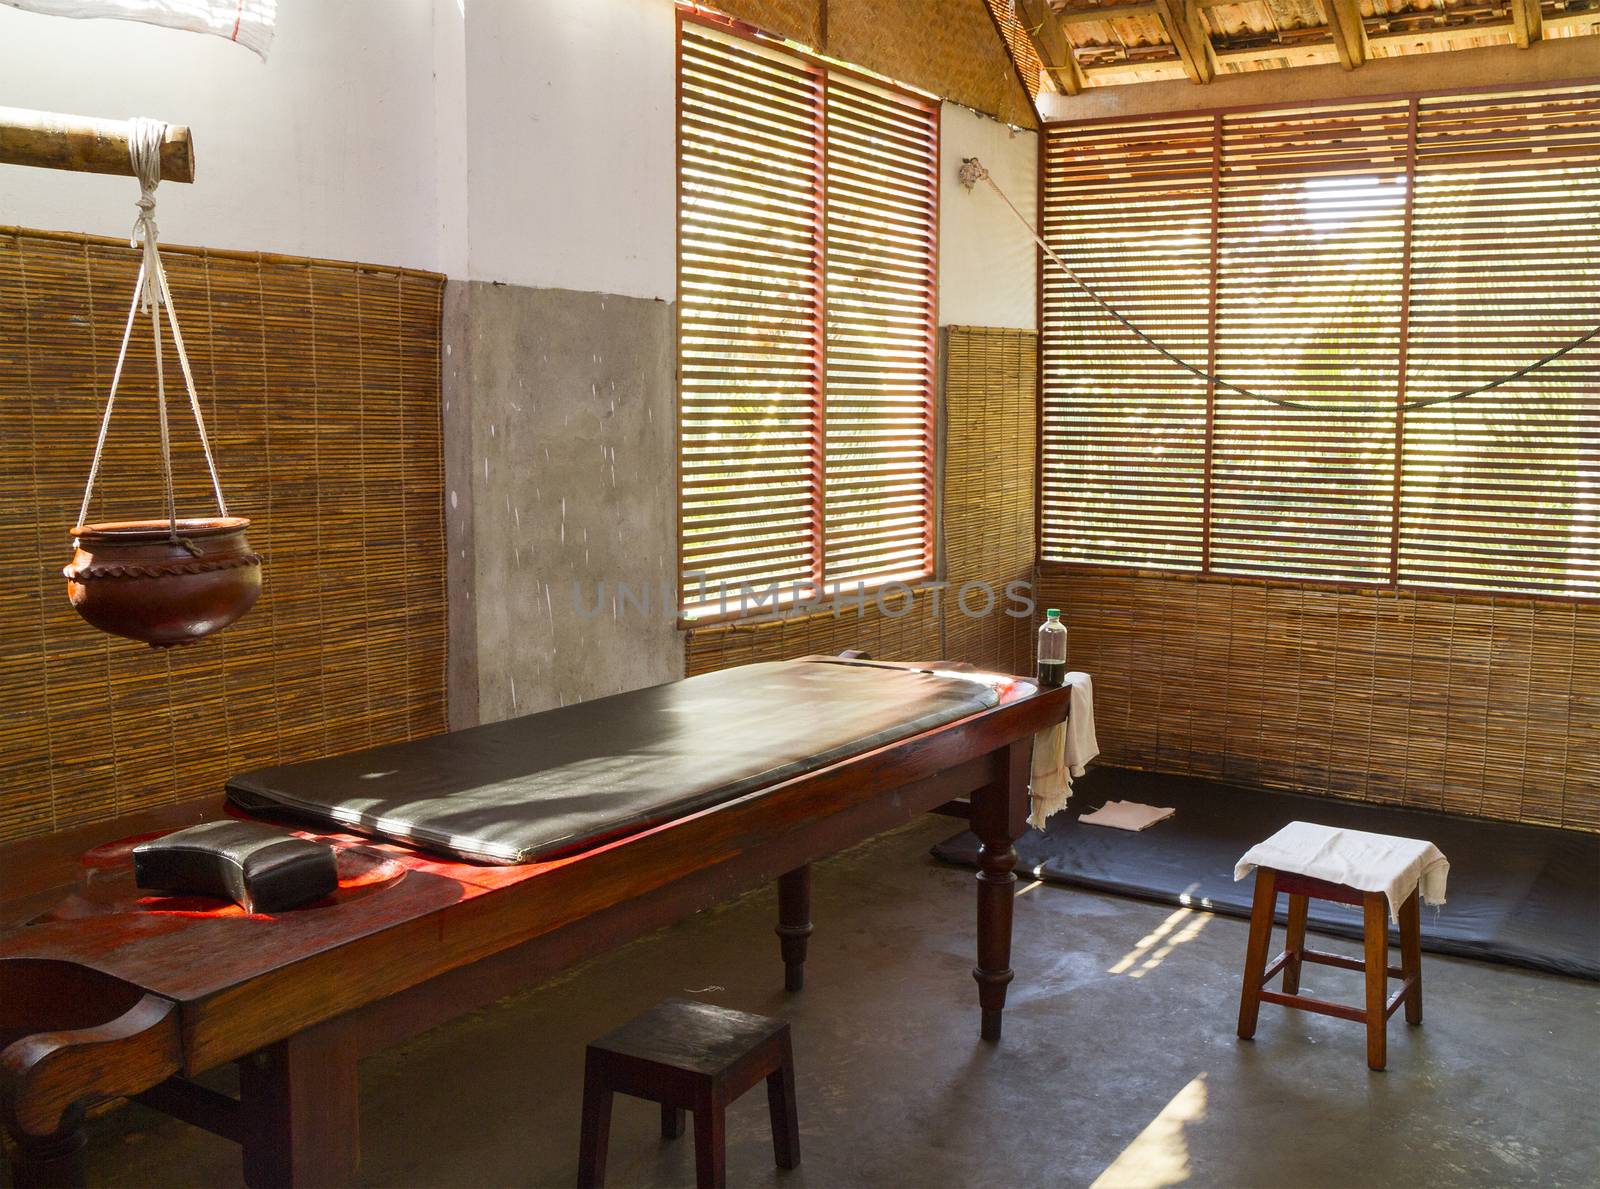 The room  for medical treatments in the Ayurvedic clinic (Kerala, India)